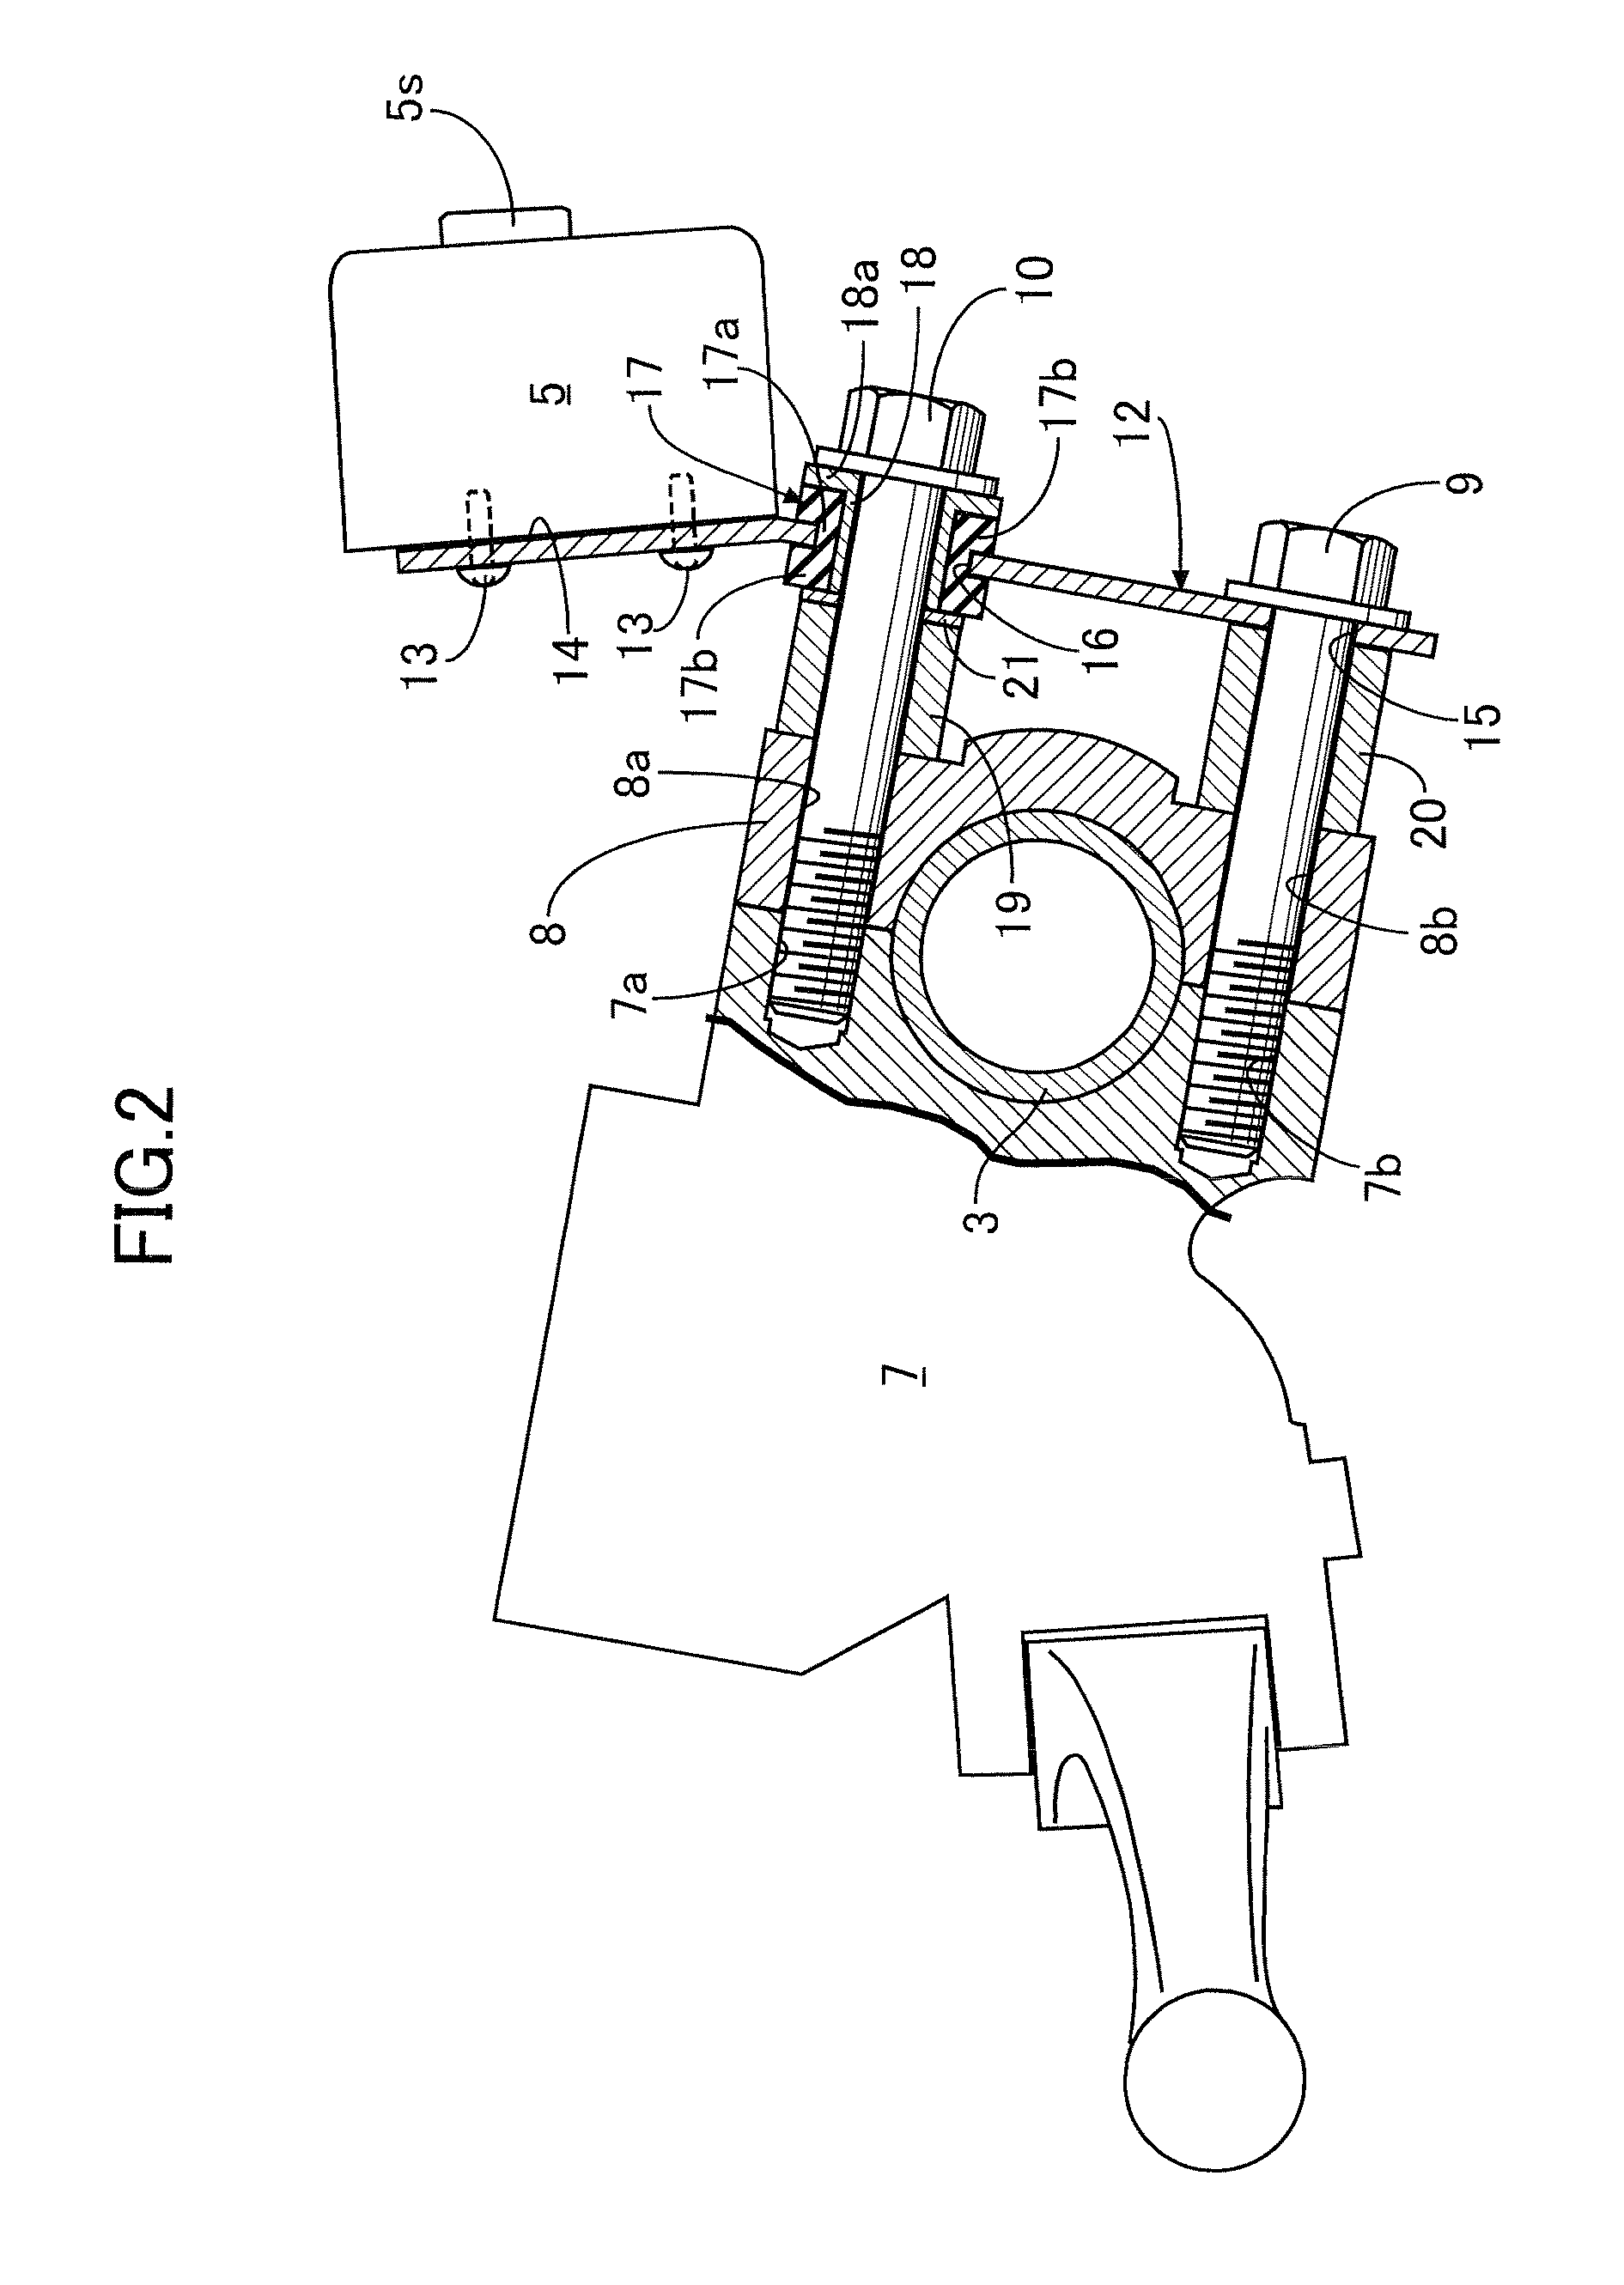 Electrical device mounting structure on a motorcycle